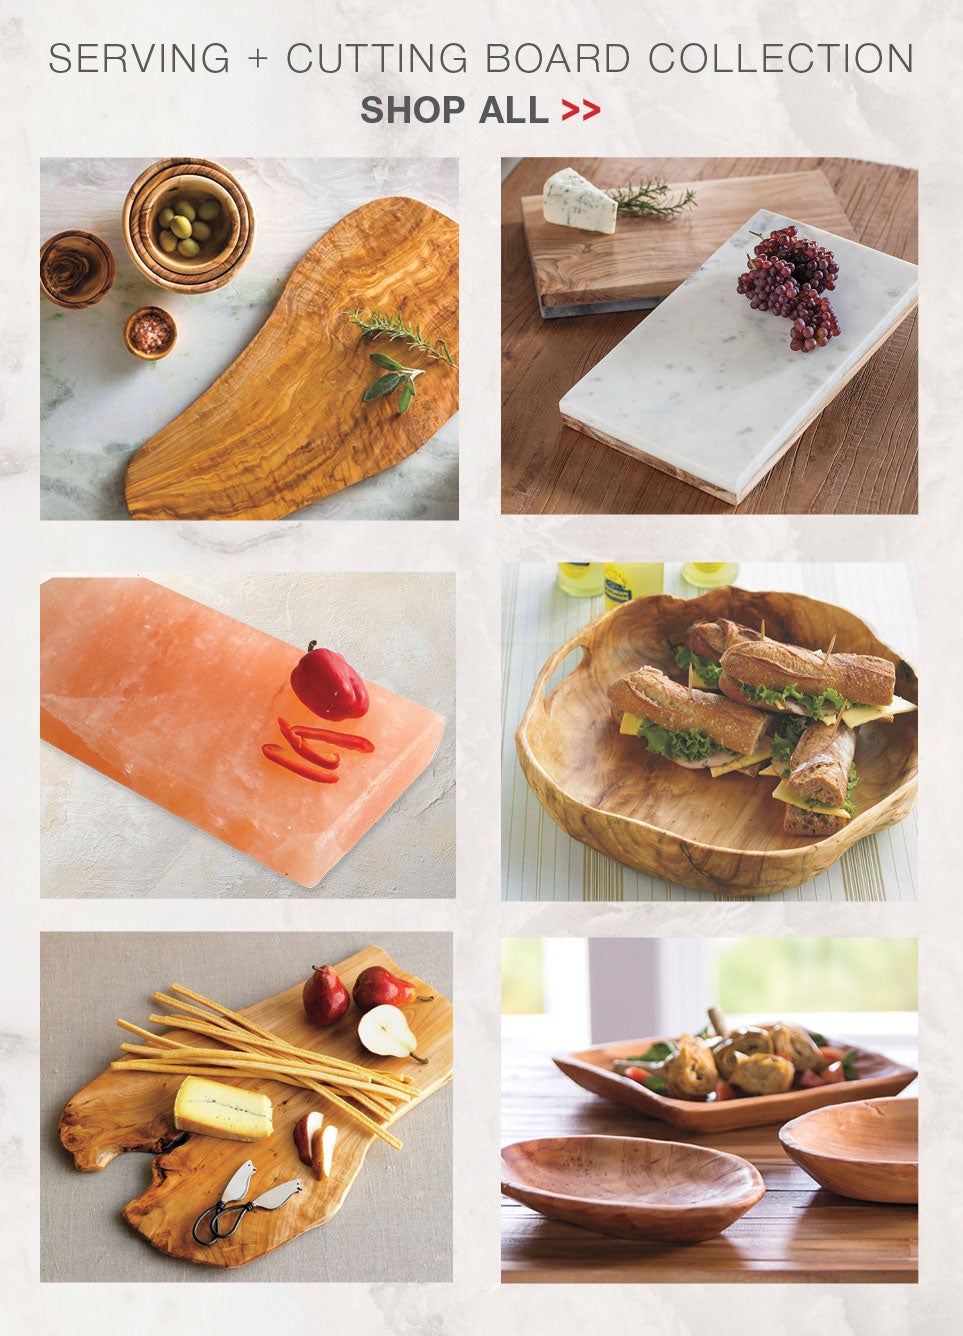 Serving + Cutting Board Collection - Shop All